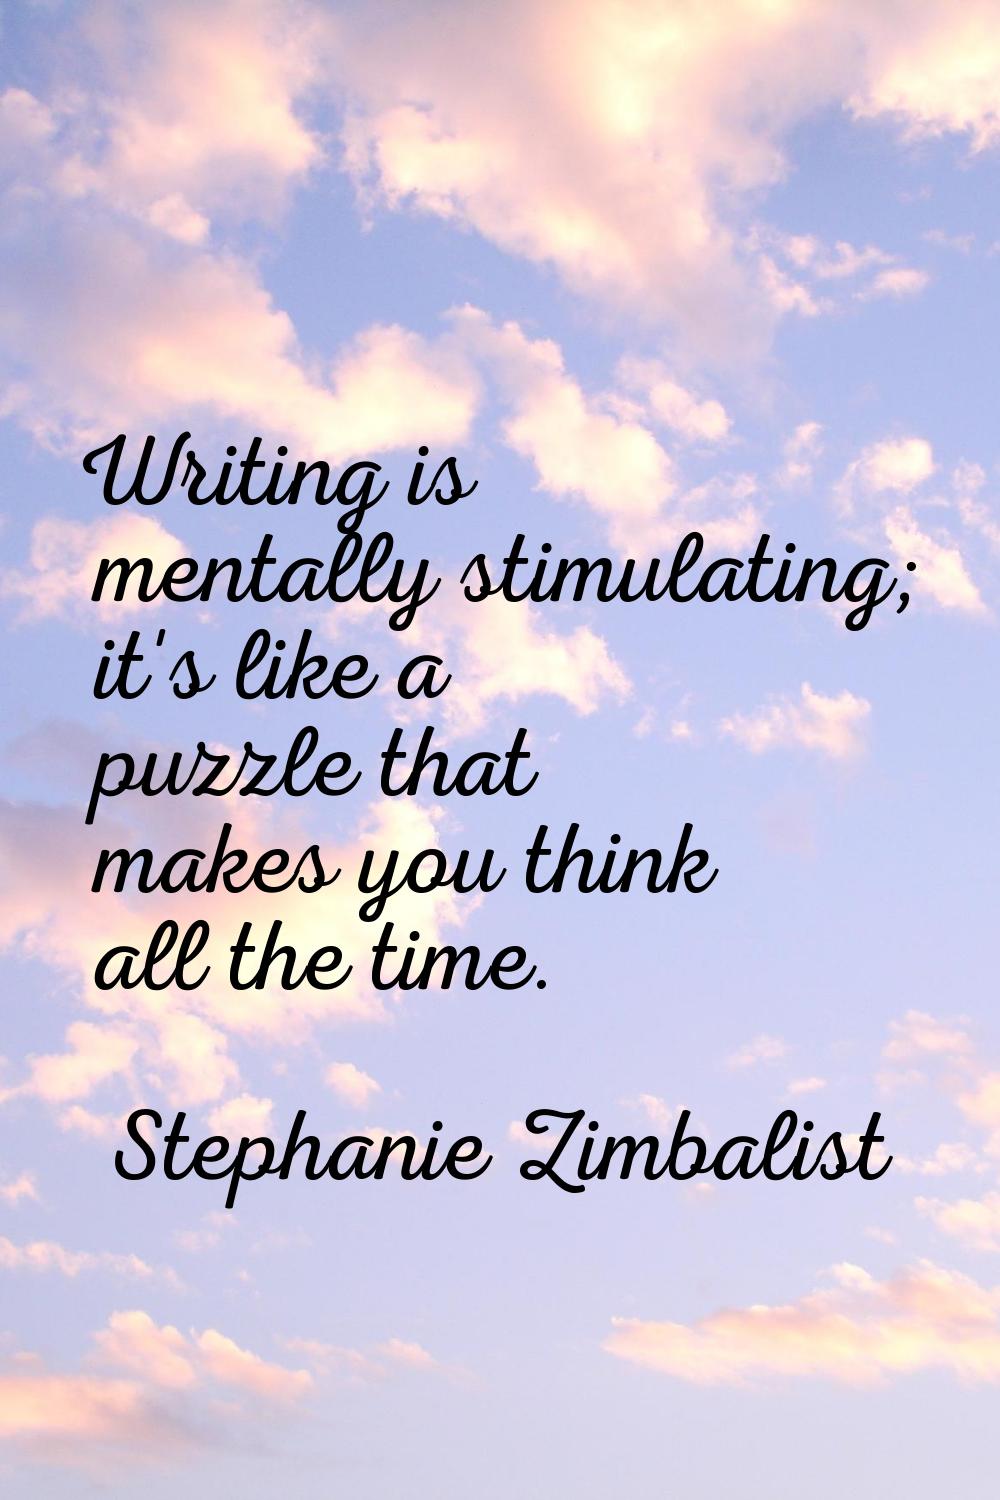 Writing is mentally stimulating; it's like a puzzle that makes you think all the time.